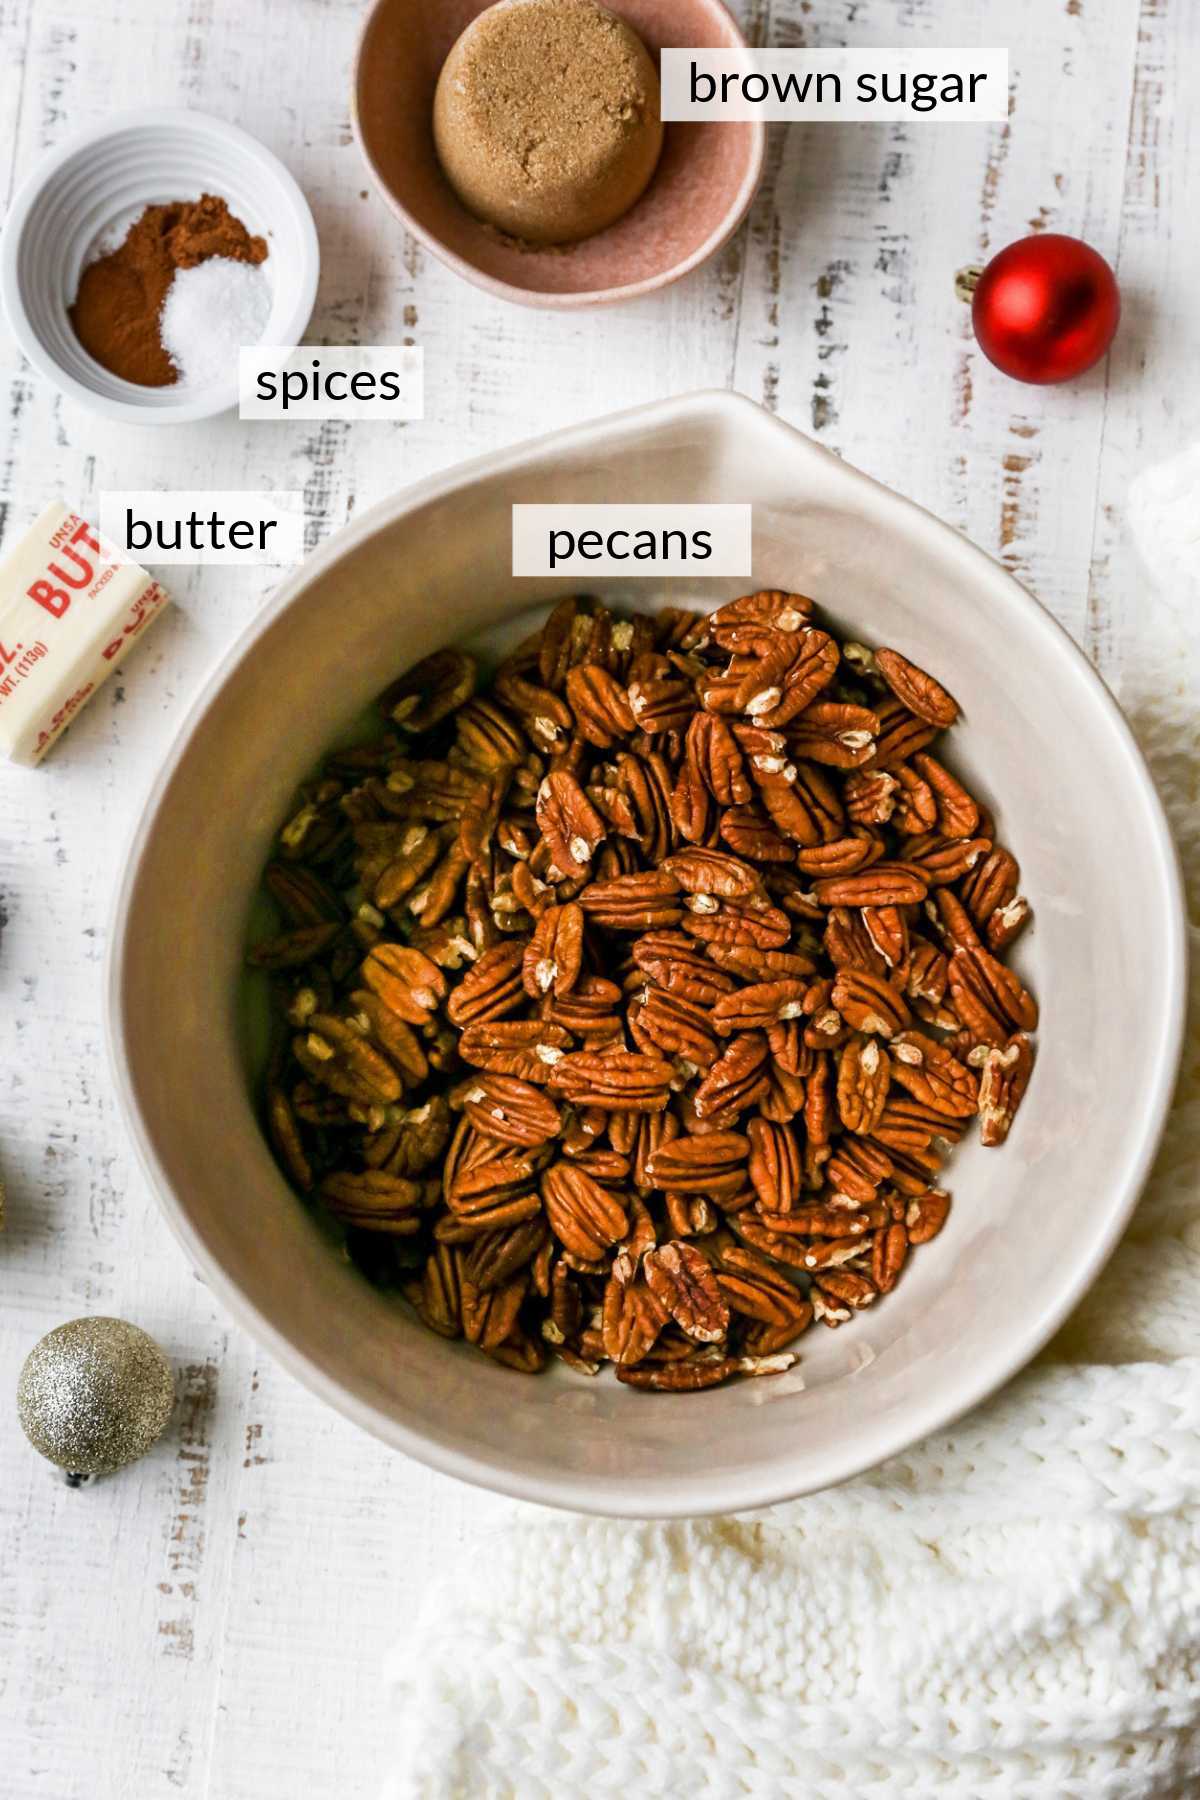 Pecan halves, spices, brown sugar and butter divided into portions.